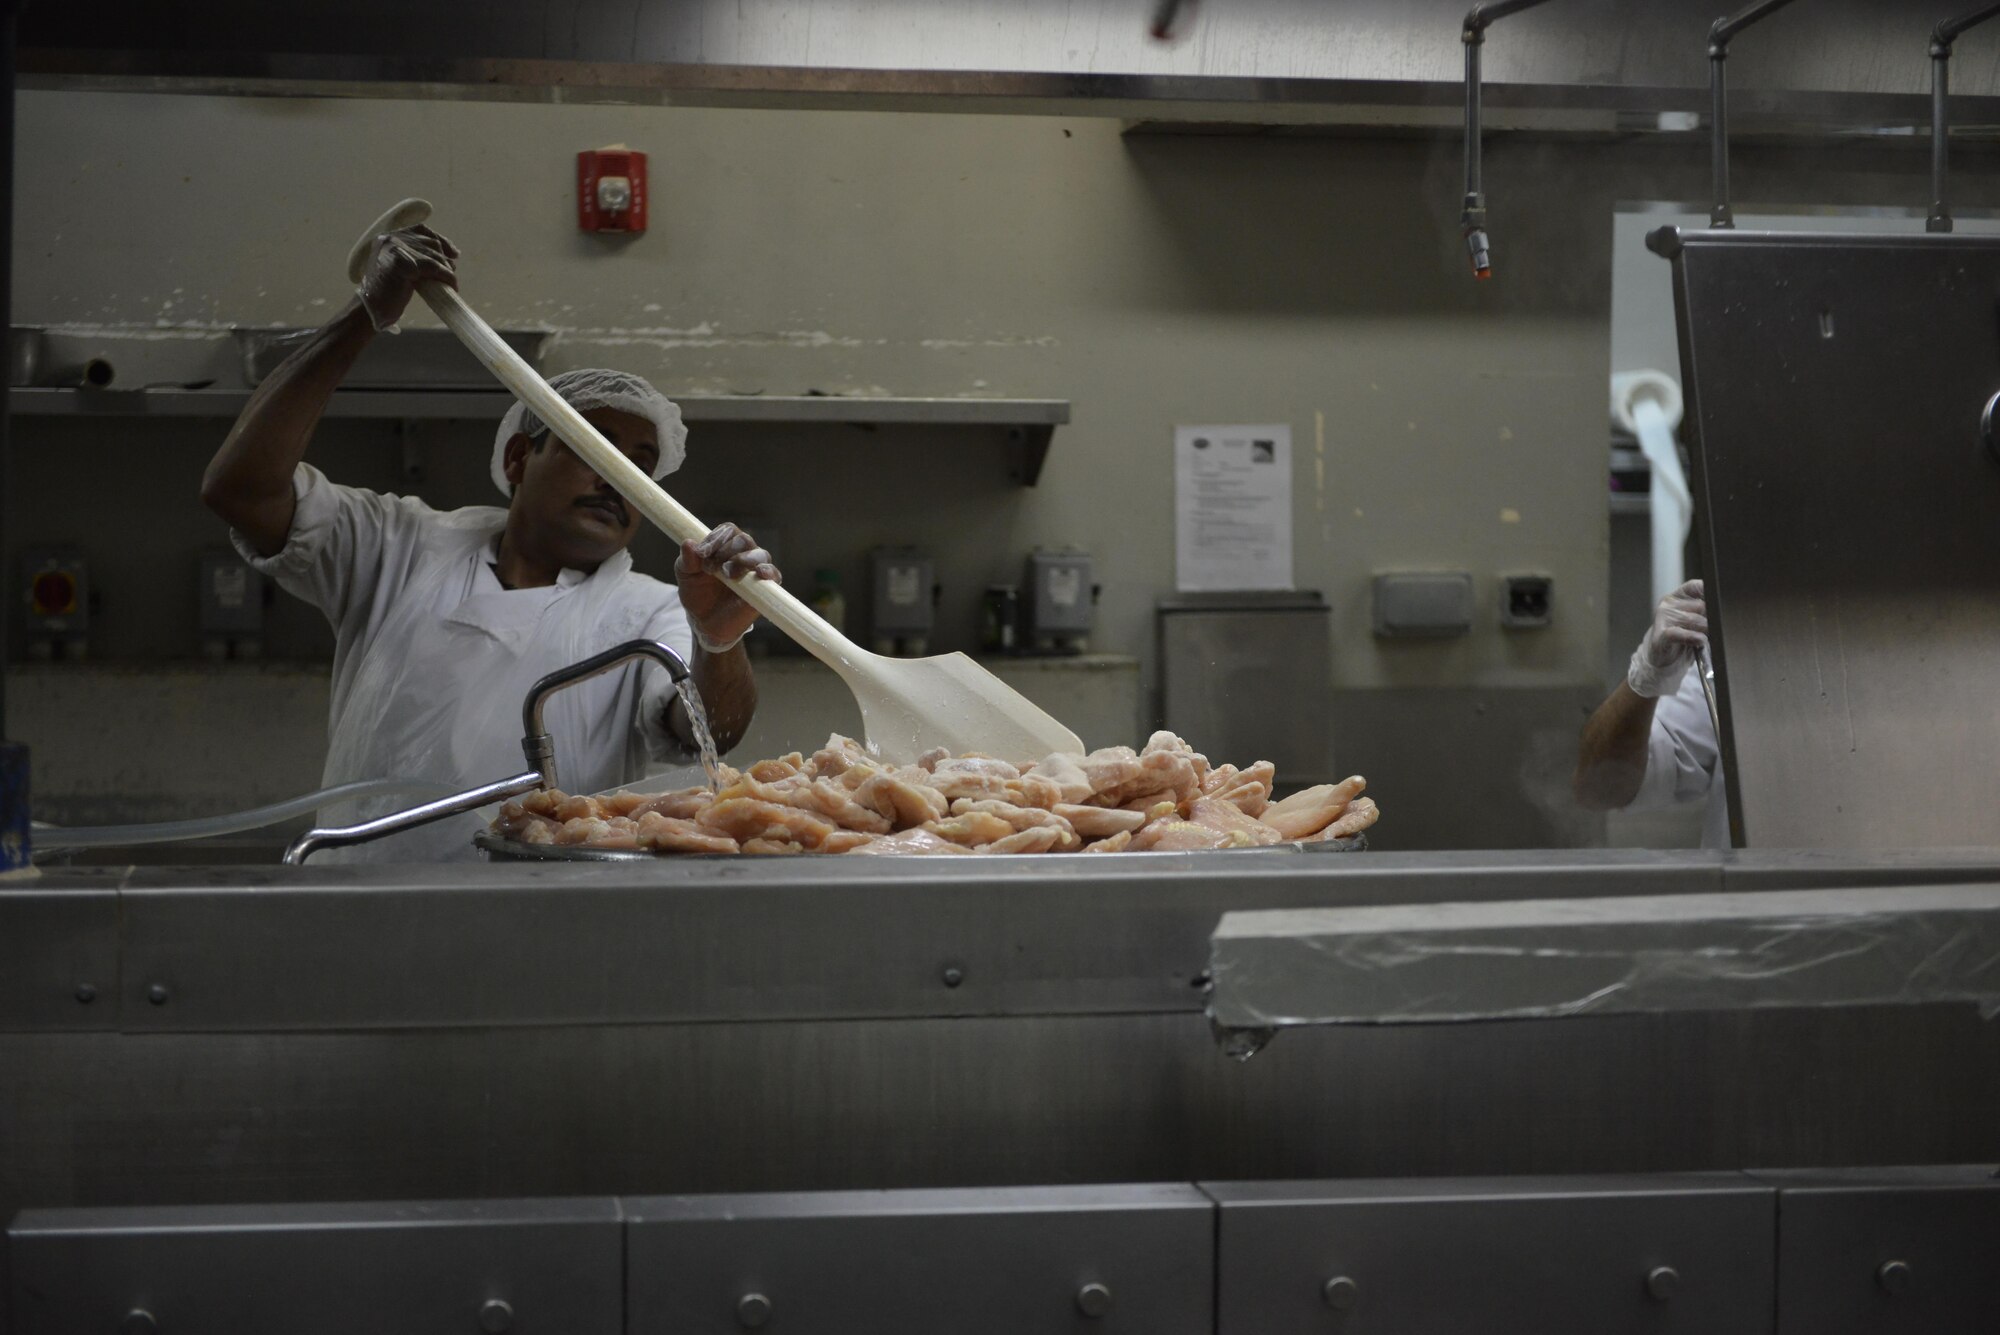 A dining facility cook thaws a pallet’s worth of chicken to help prepare for the dinner menu freezer at the Independence Dining Facility at Al Udeid Air Base, Qatar July 21, 2015. (U.S. Air Force photo/Staff Sgt. Alexandre Montes)